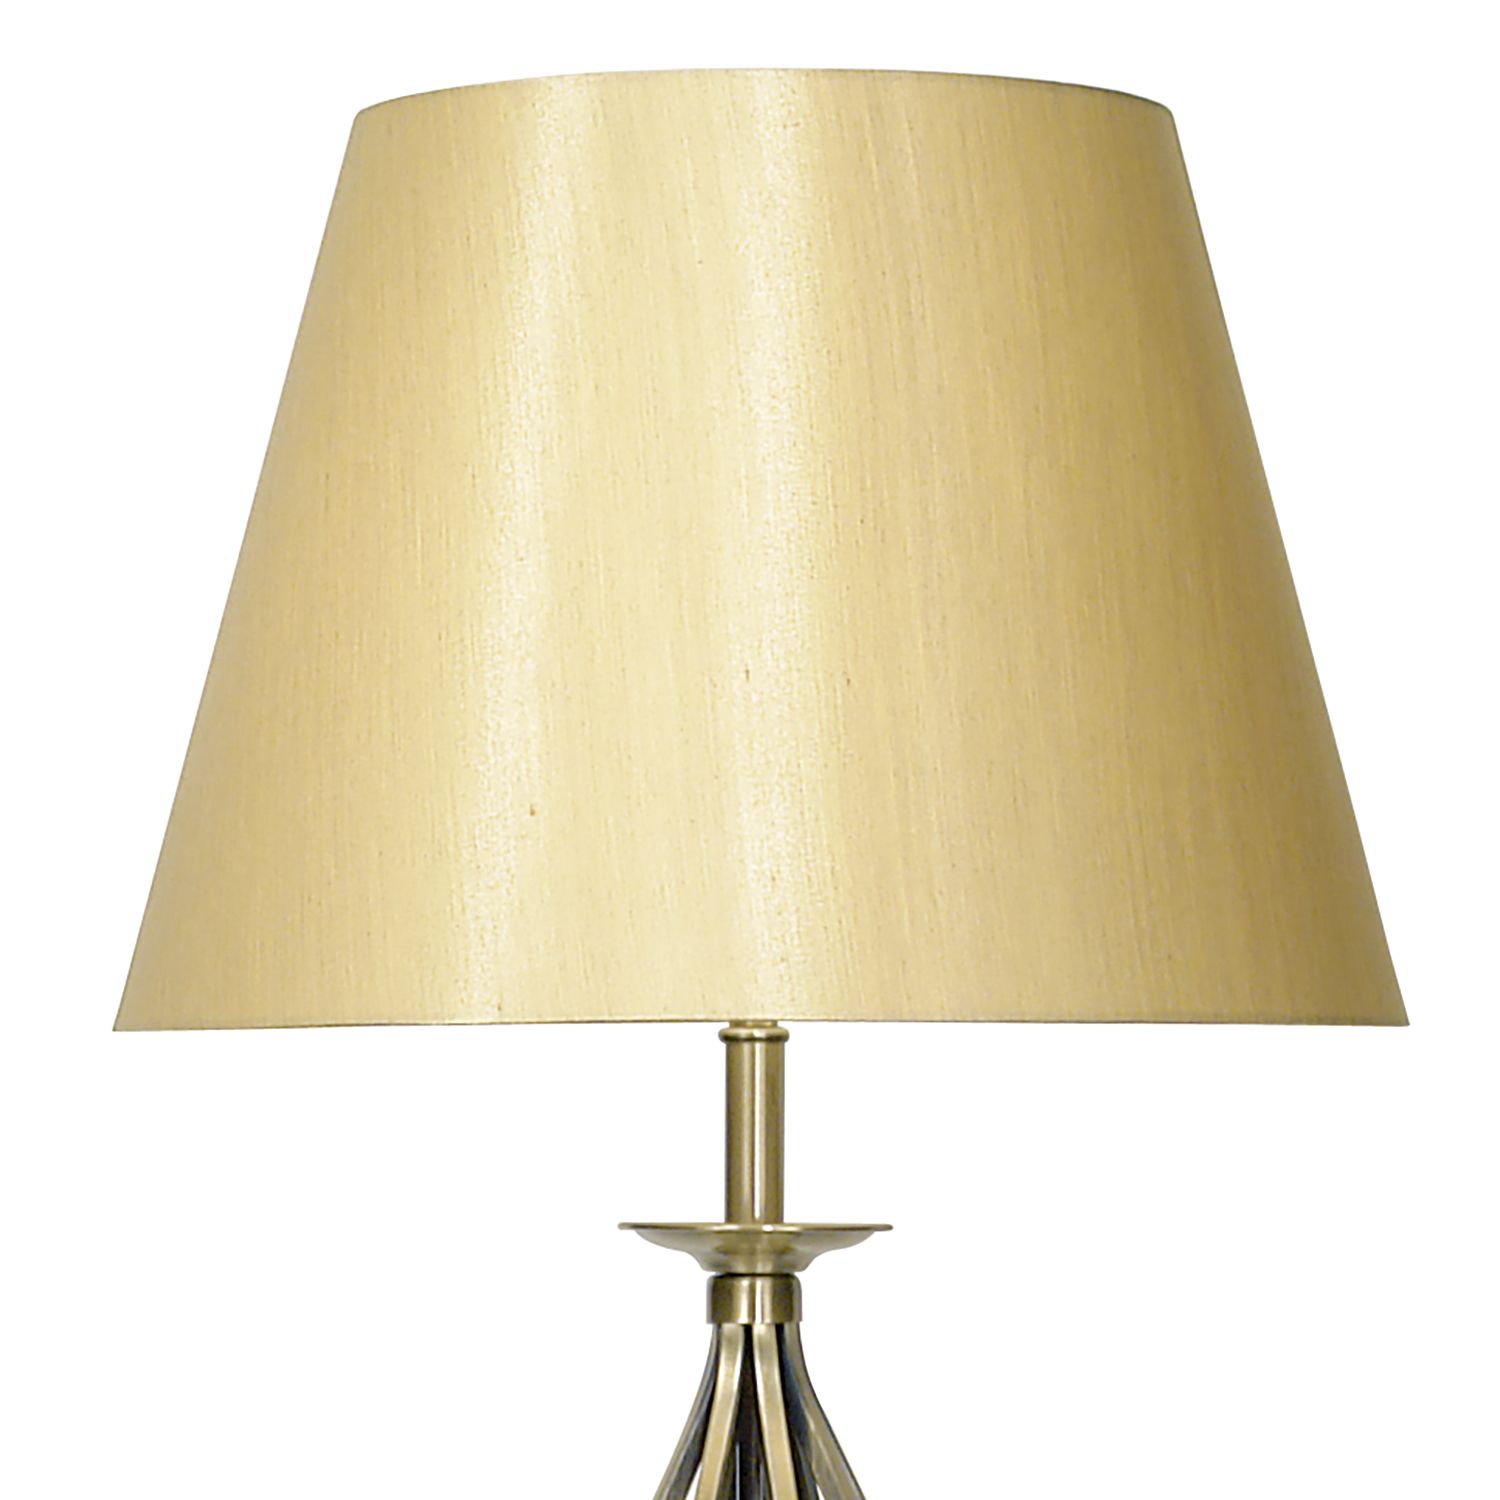 Bybliss Floor Lamp Antique Brass complete with BYB1535 Gold Shade